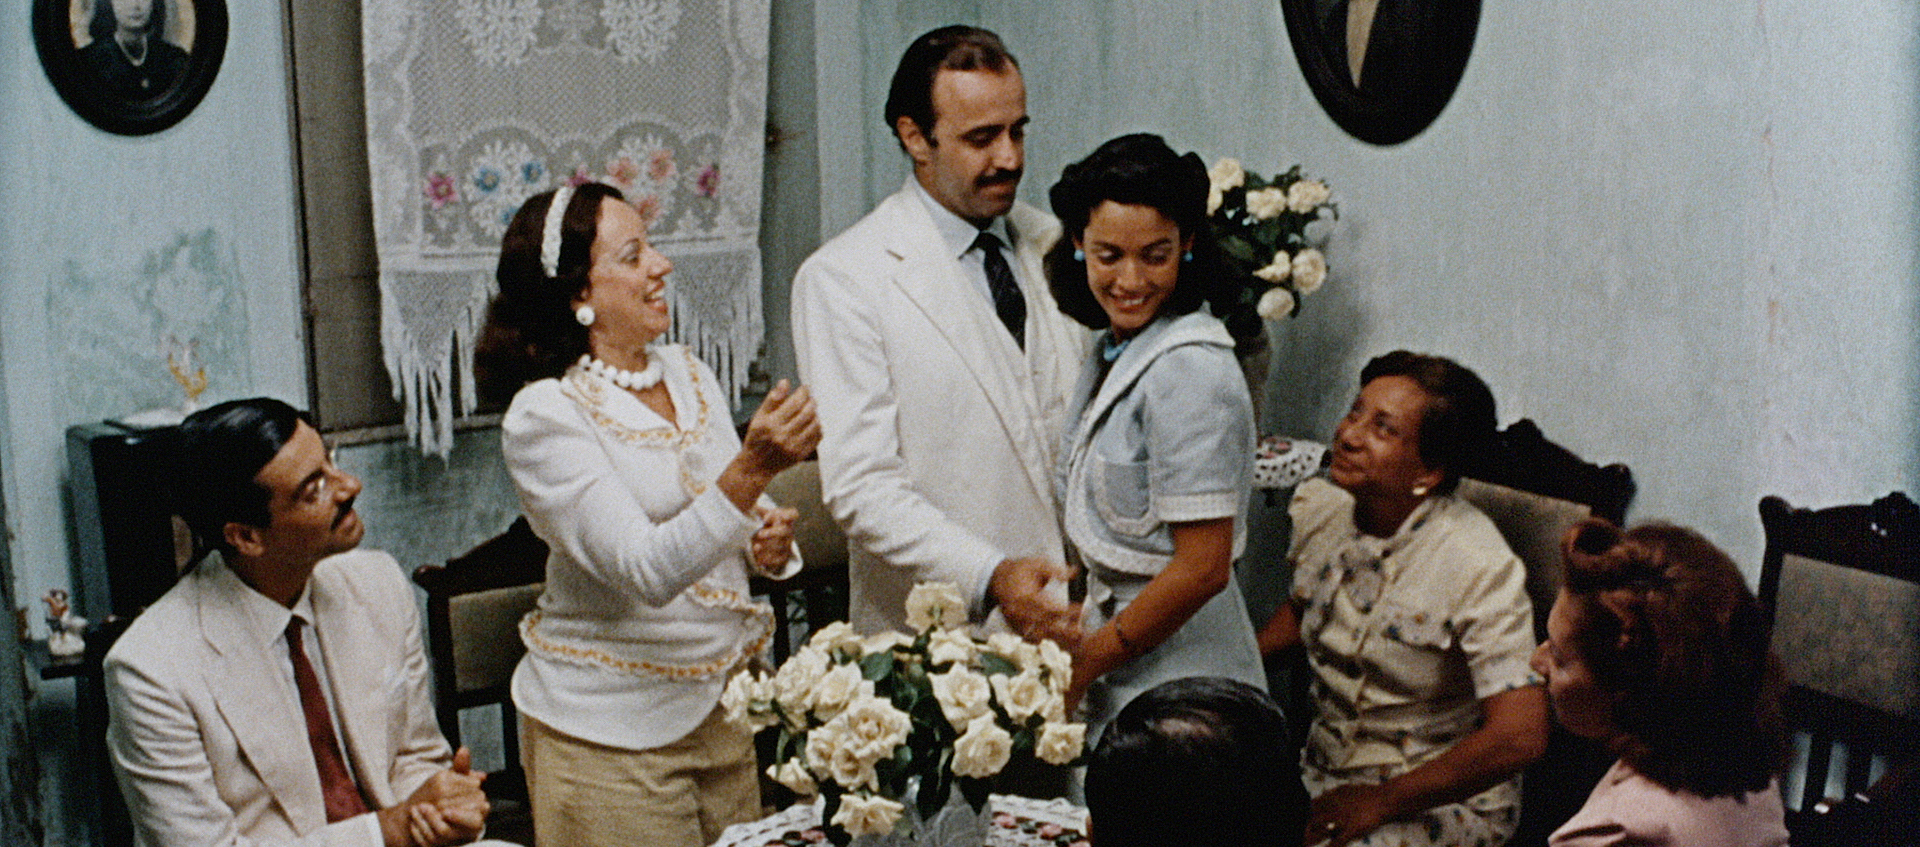 A wedding scene from the movie Dona Flor.